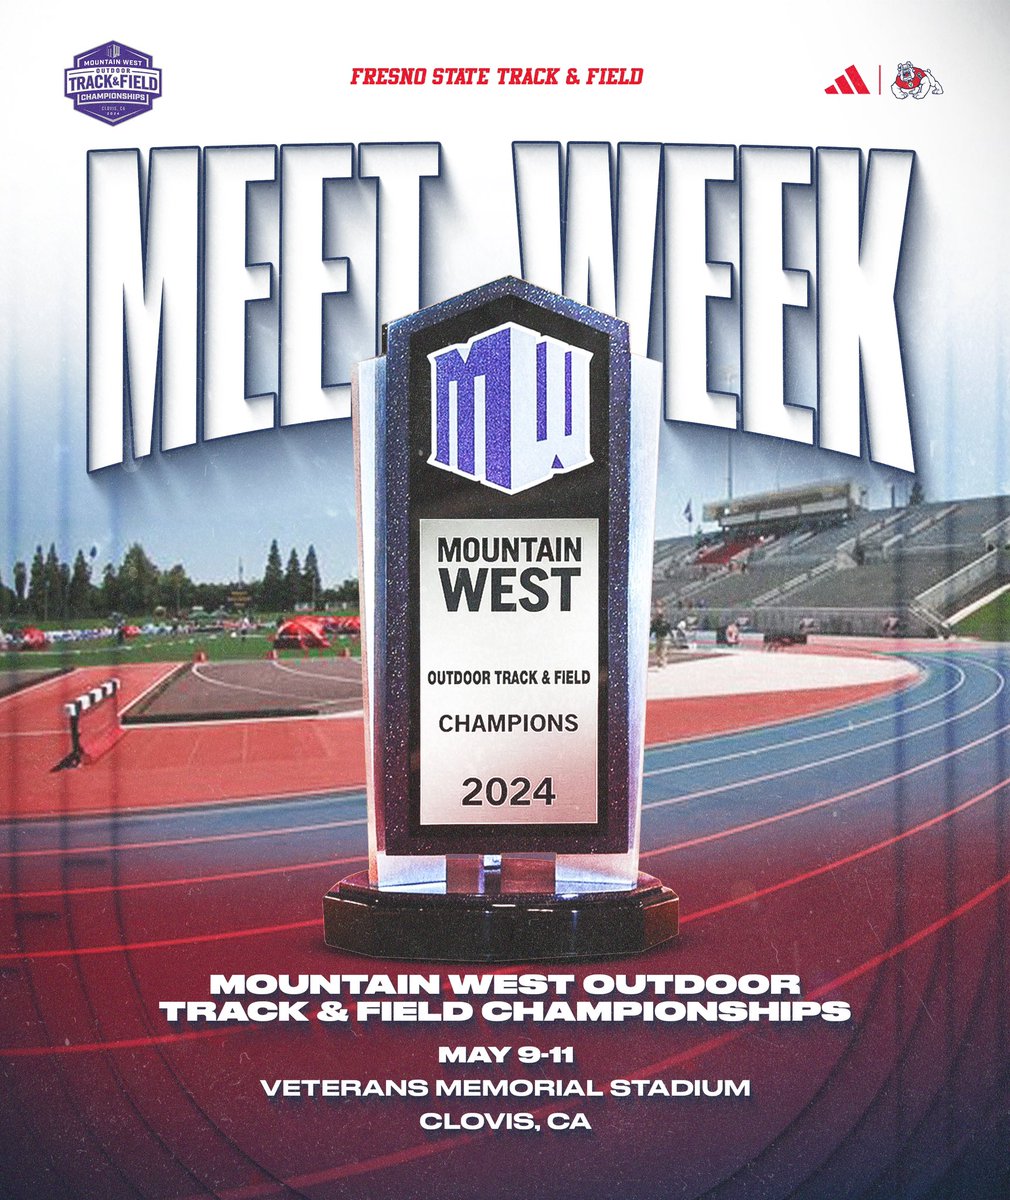 A lot on the line this weekend 🏅 🏆 linktr.ee/FresnoStateTFXC